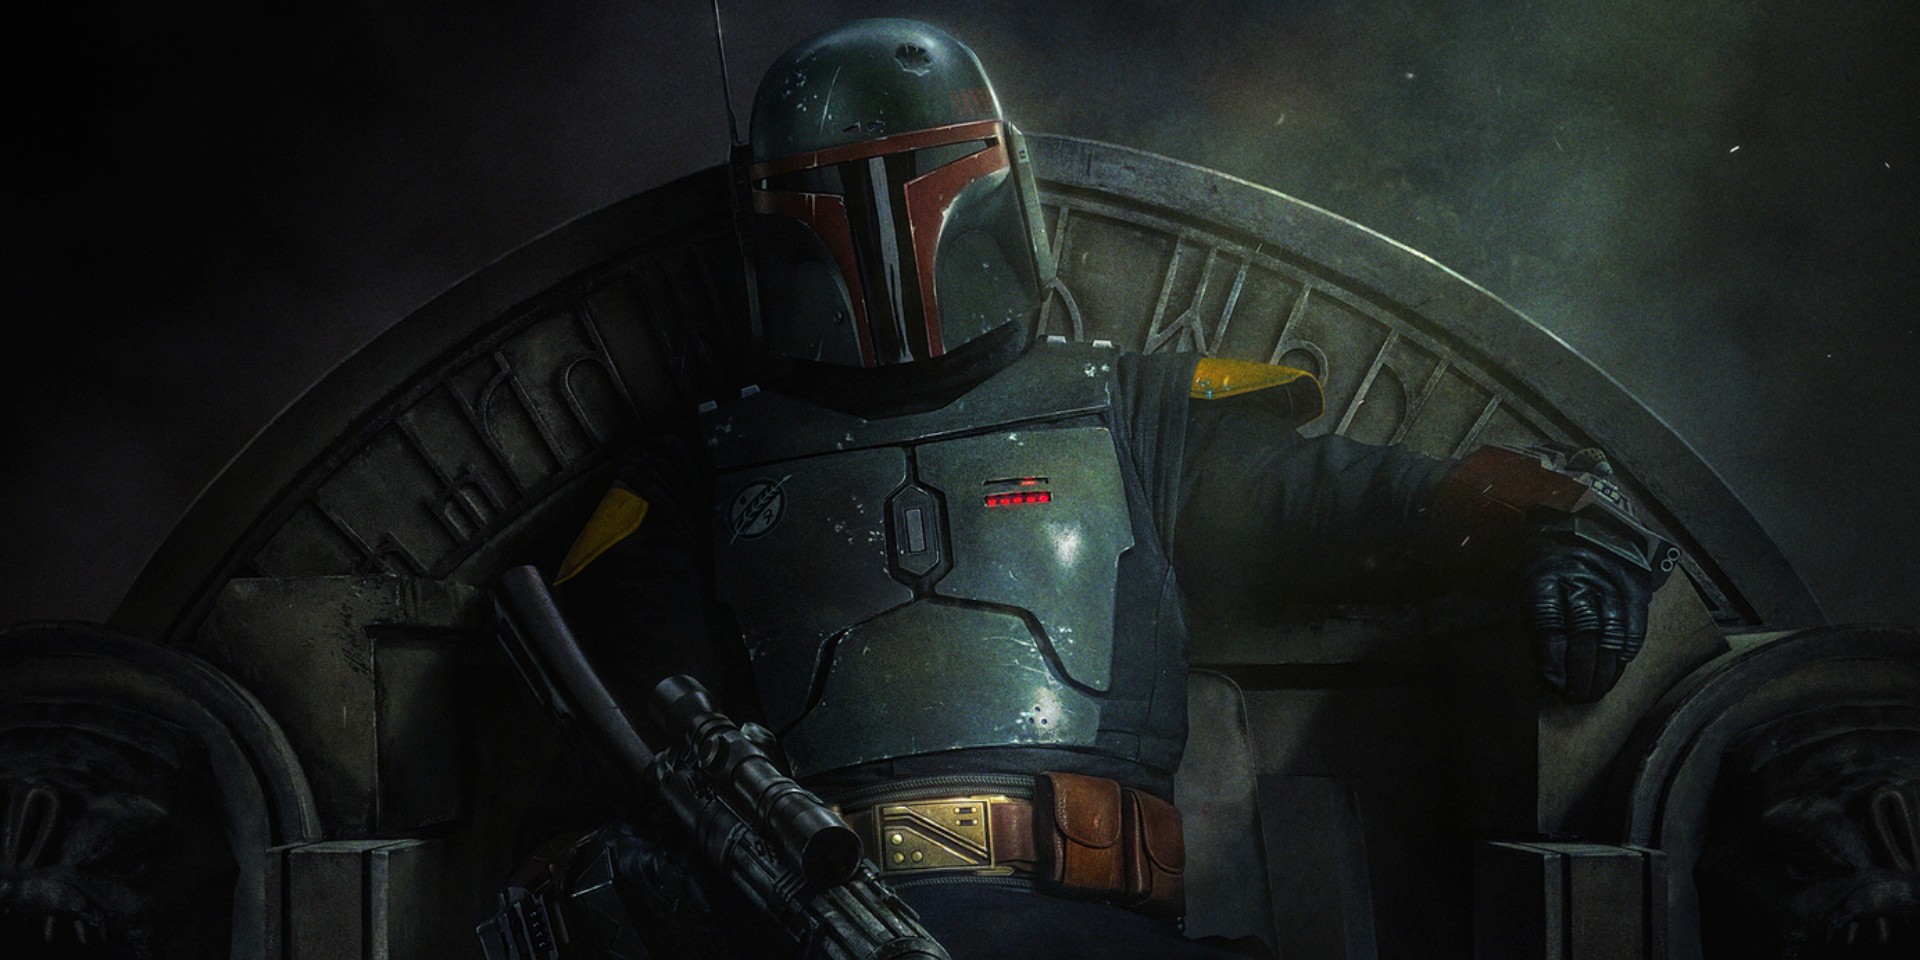 Star Wars series 'The Book Of Boba Fett' to premiere on Disney+  this December